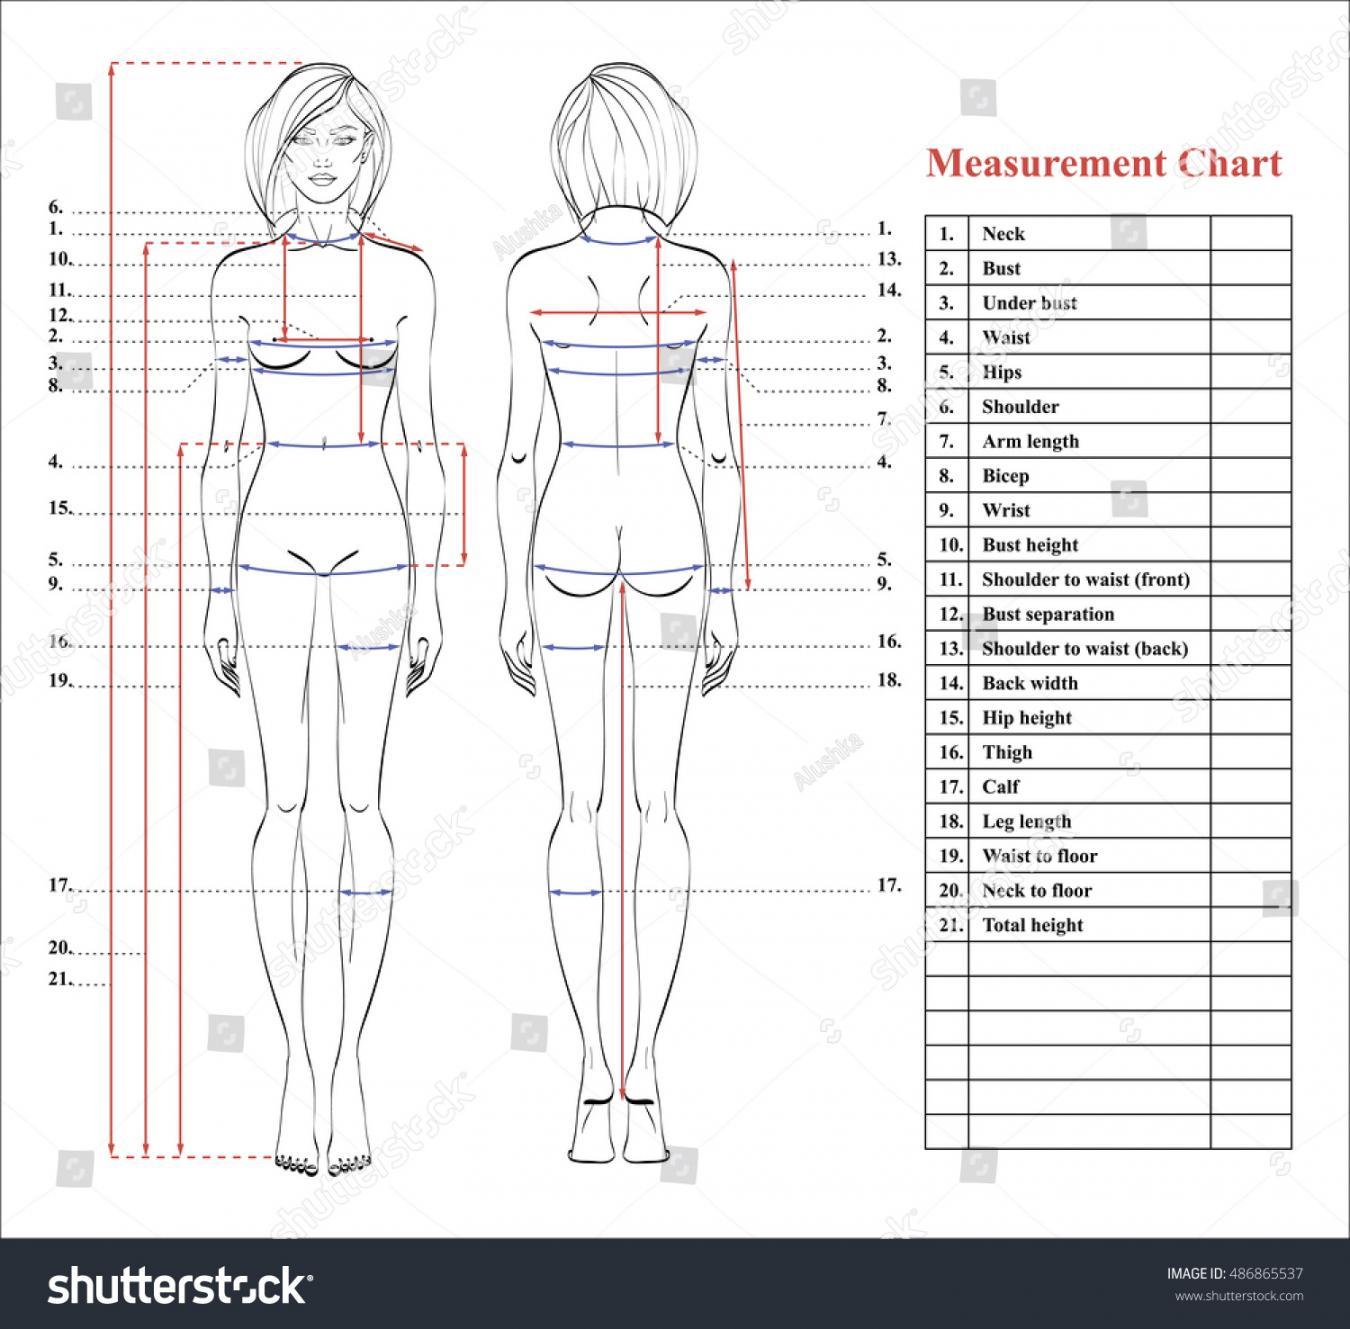 Body Measurement Chart Images: Browse , Stock Photos & Vectors  - FREE Printables - Free Printable Body Measurement Chart For Sewing